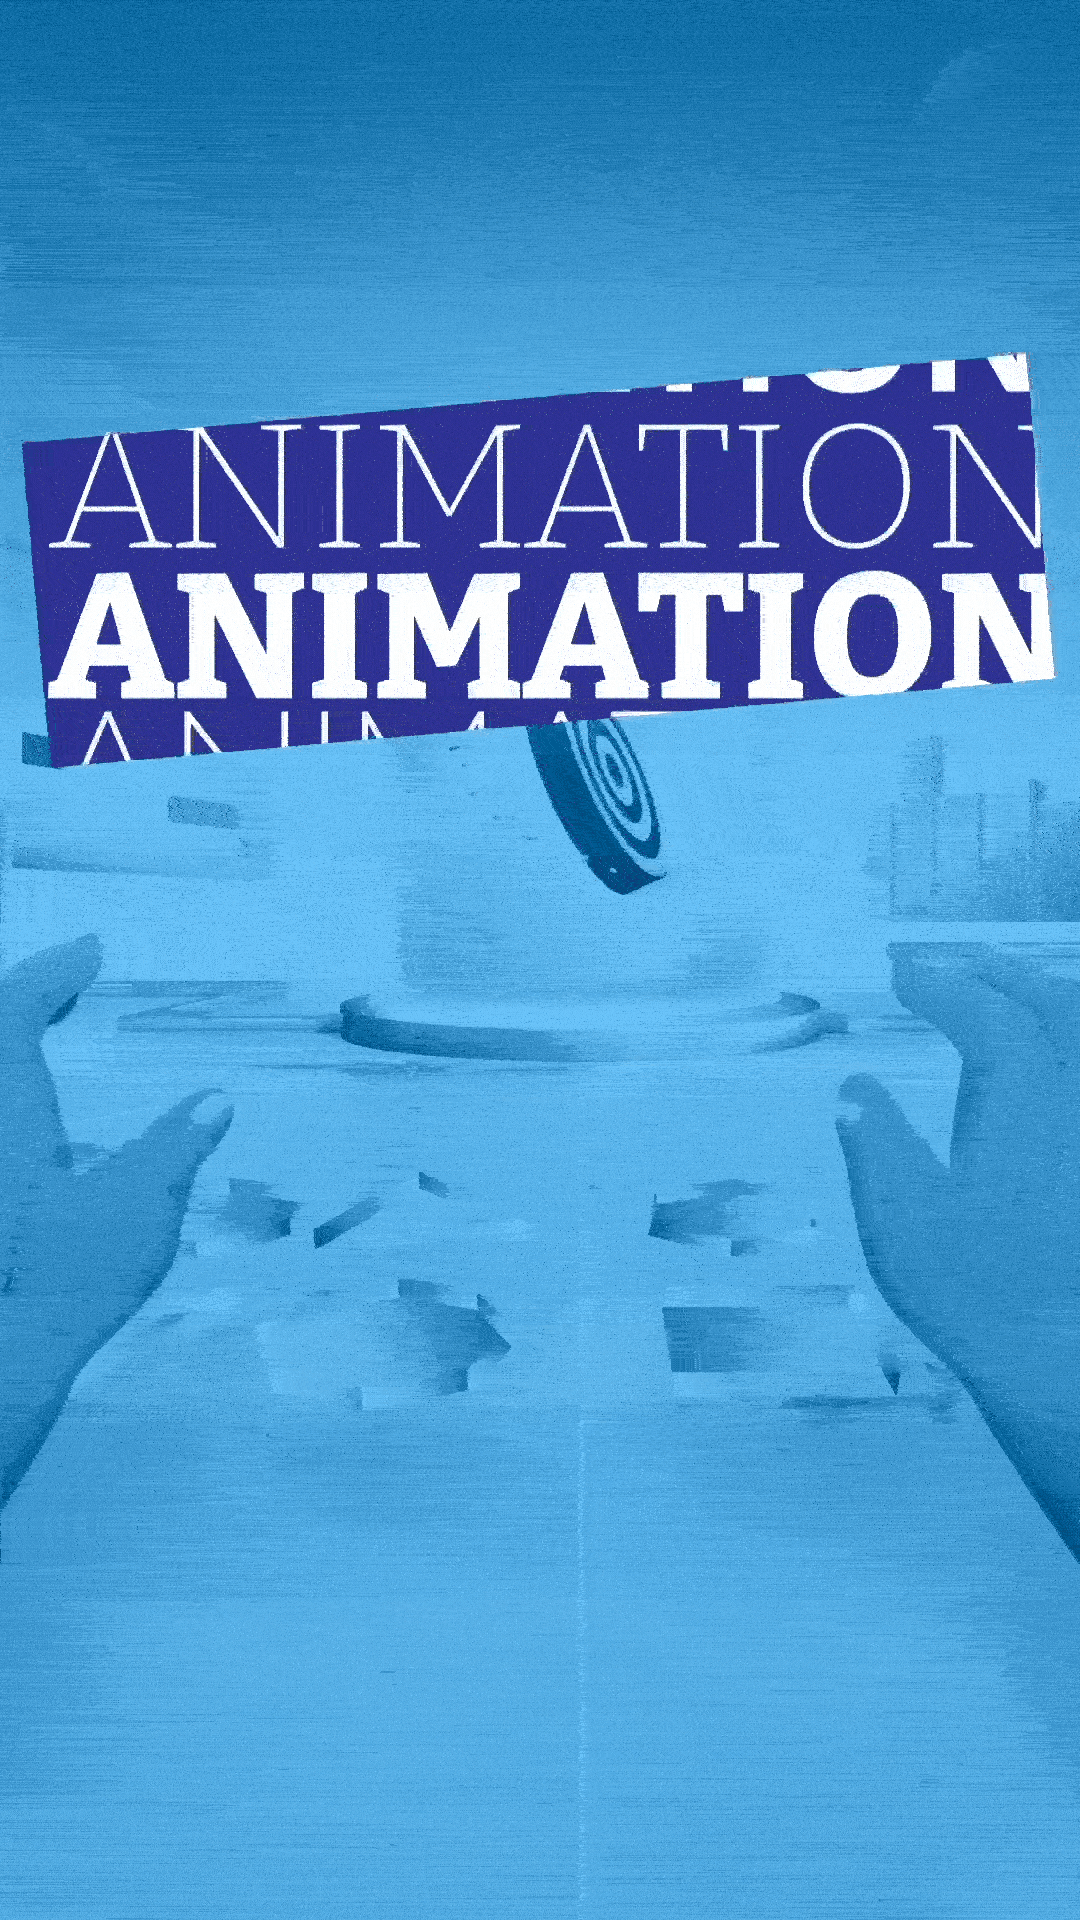 A poster with animation art.